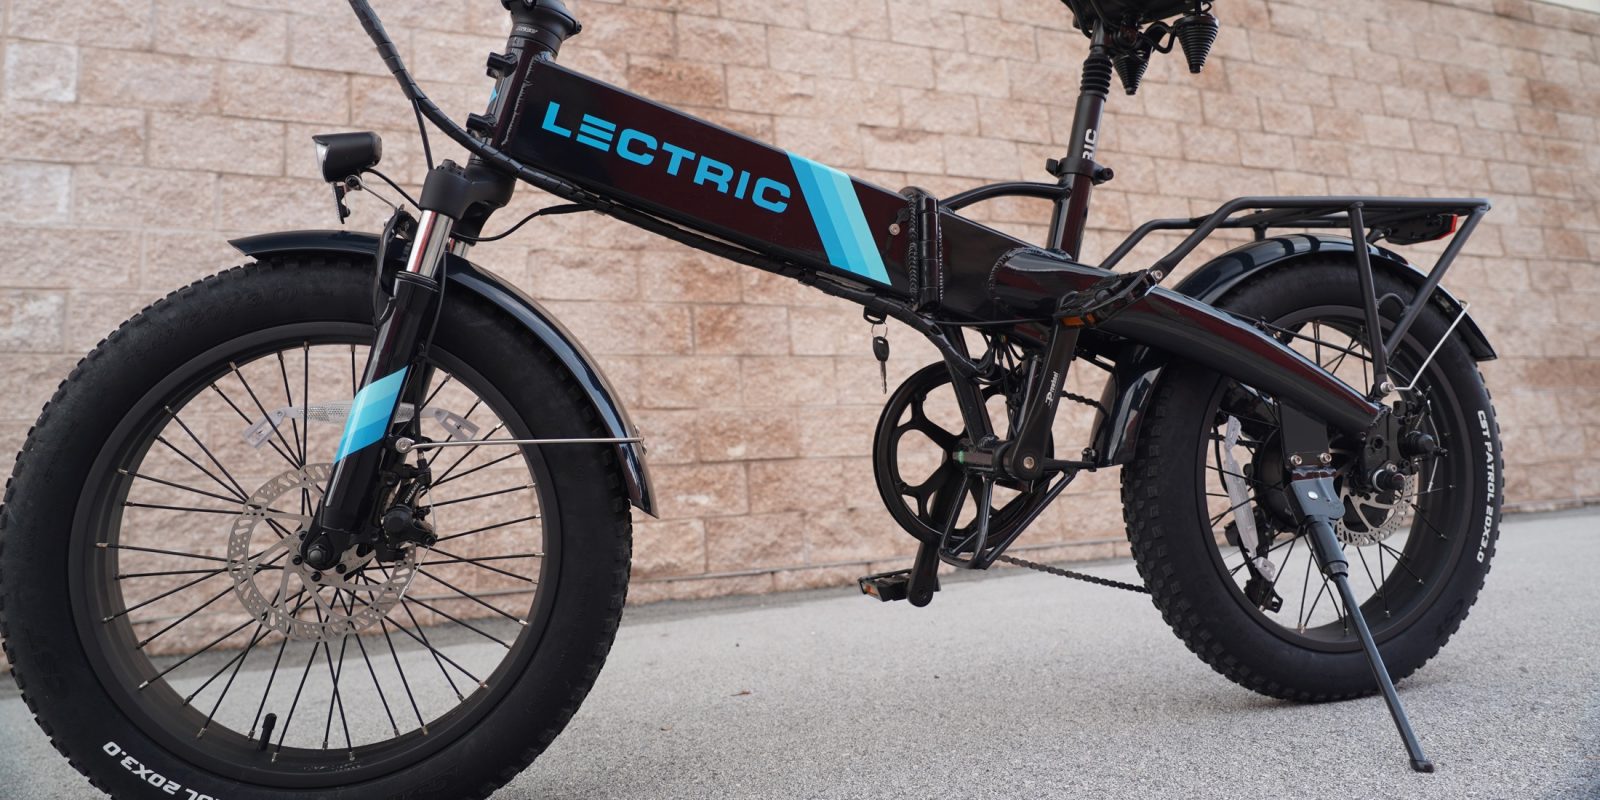 Lectric XP 2.0 electric bike review: The best bang for your buck